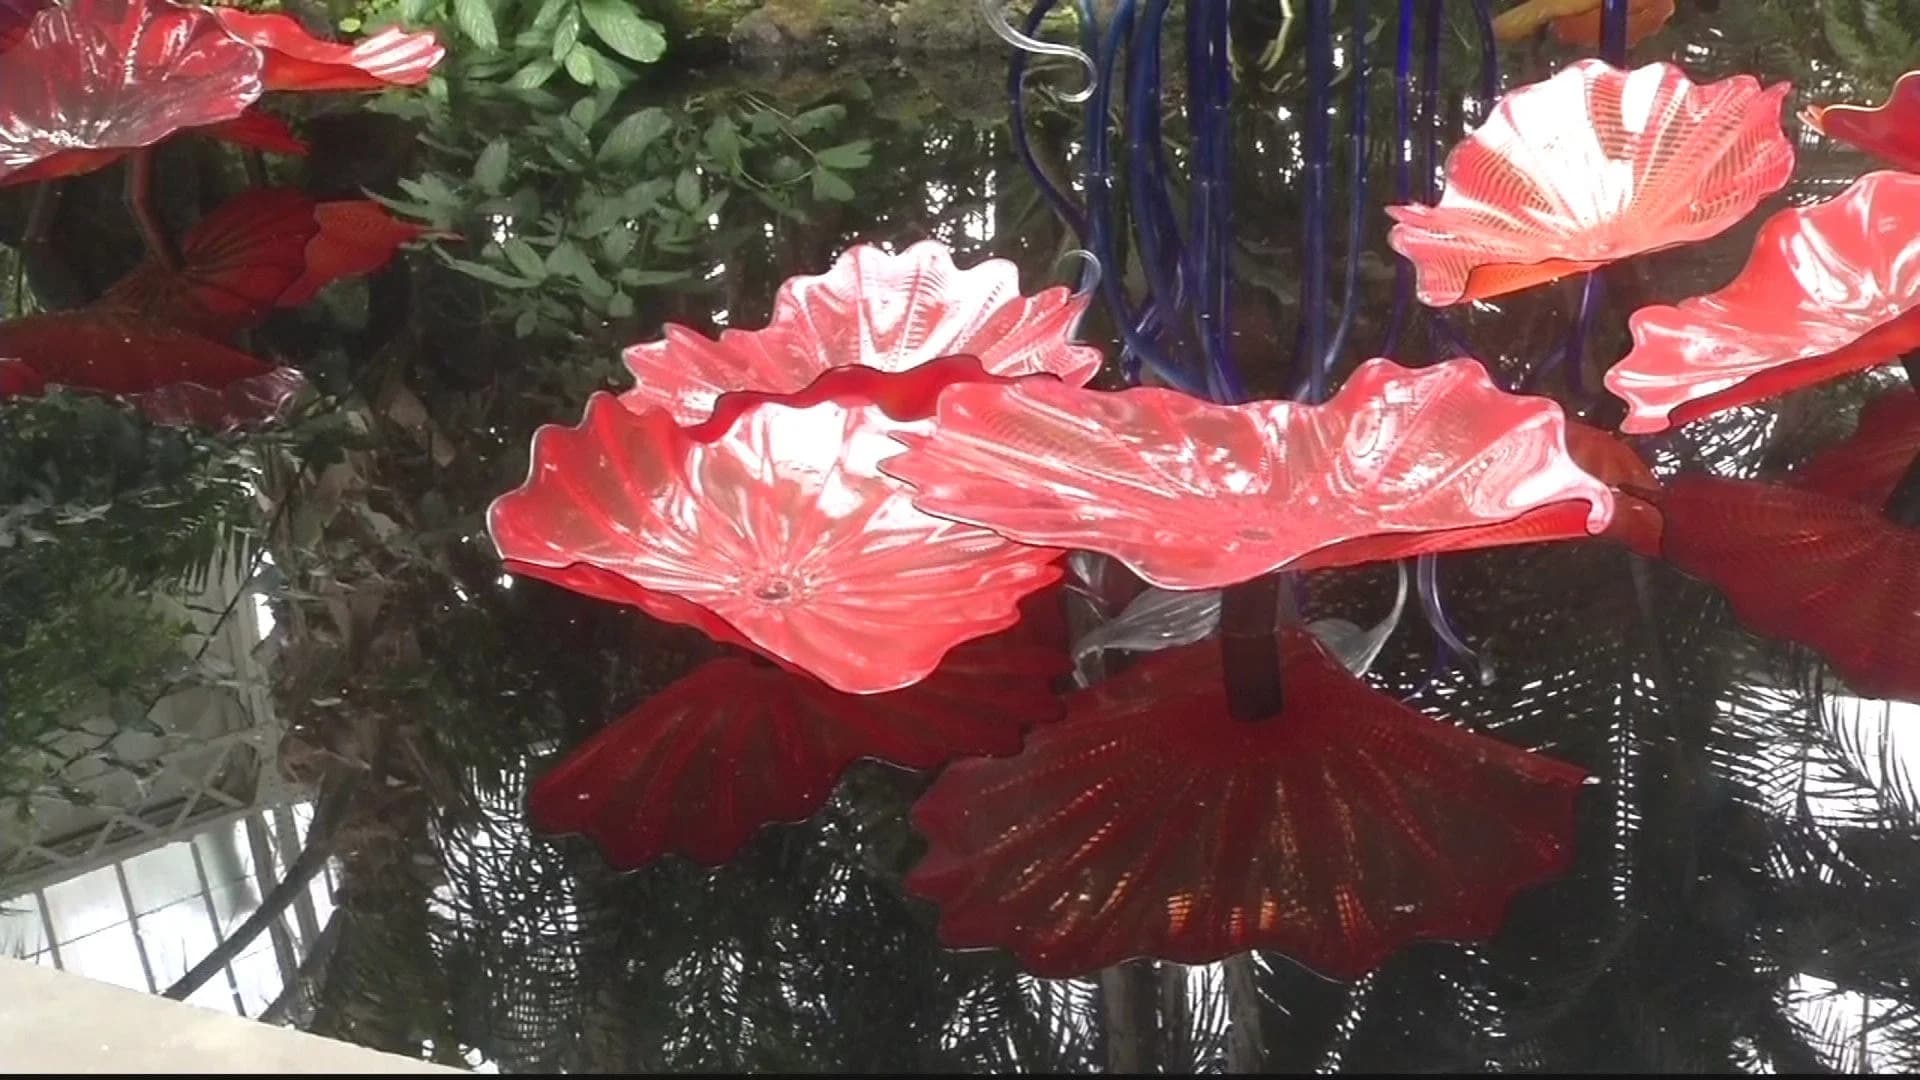 Glass-blowing artist Dale Chihuly installs exhibit at New York Botanical Garden